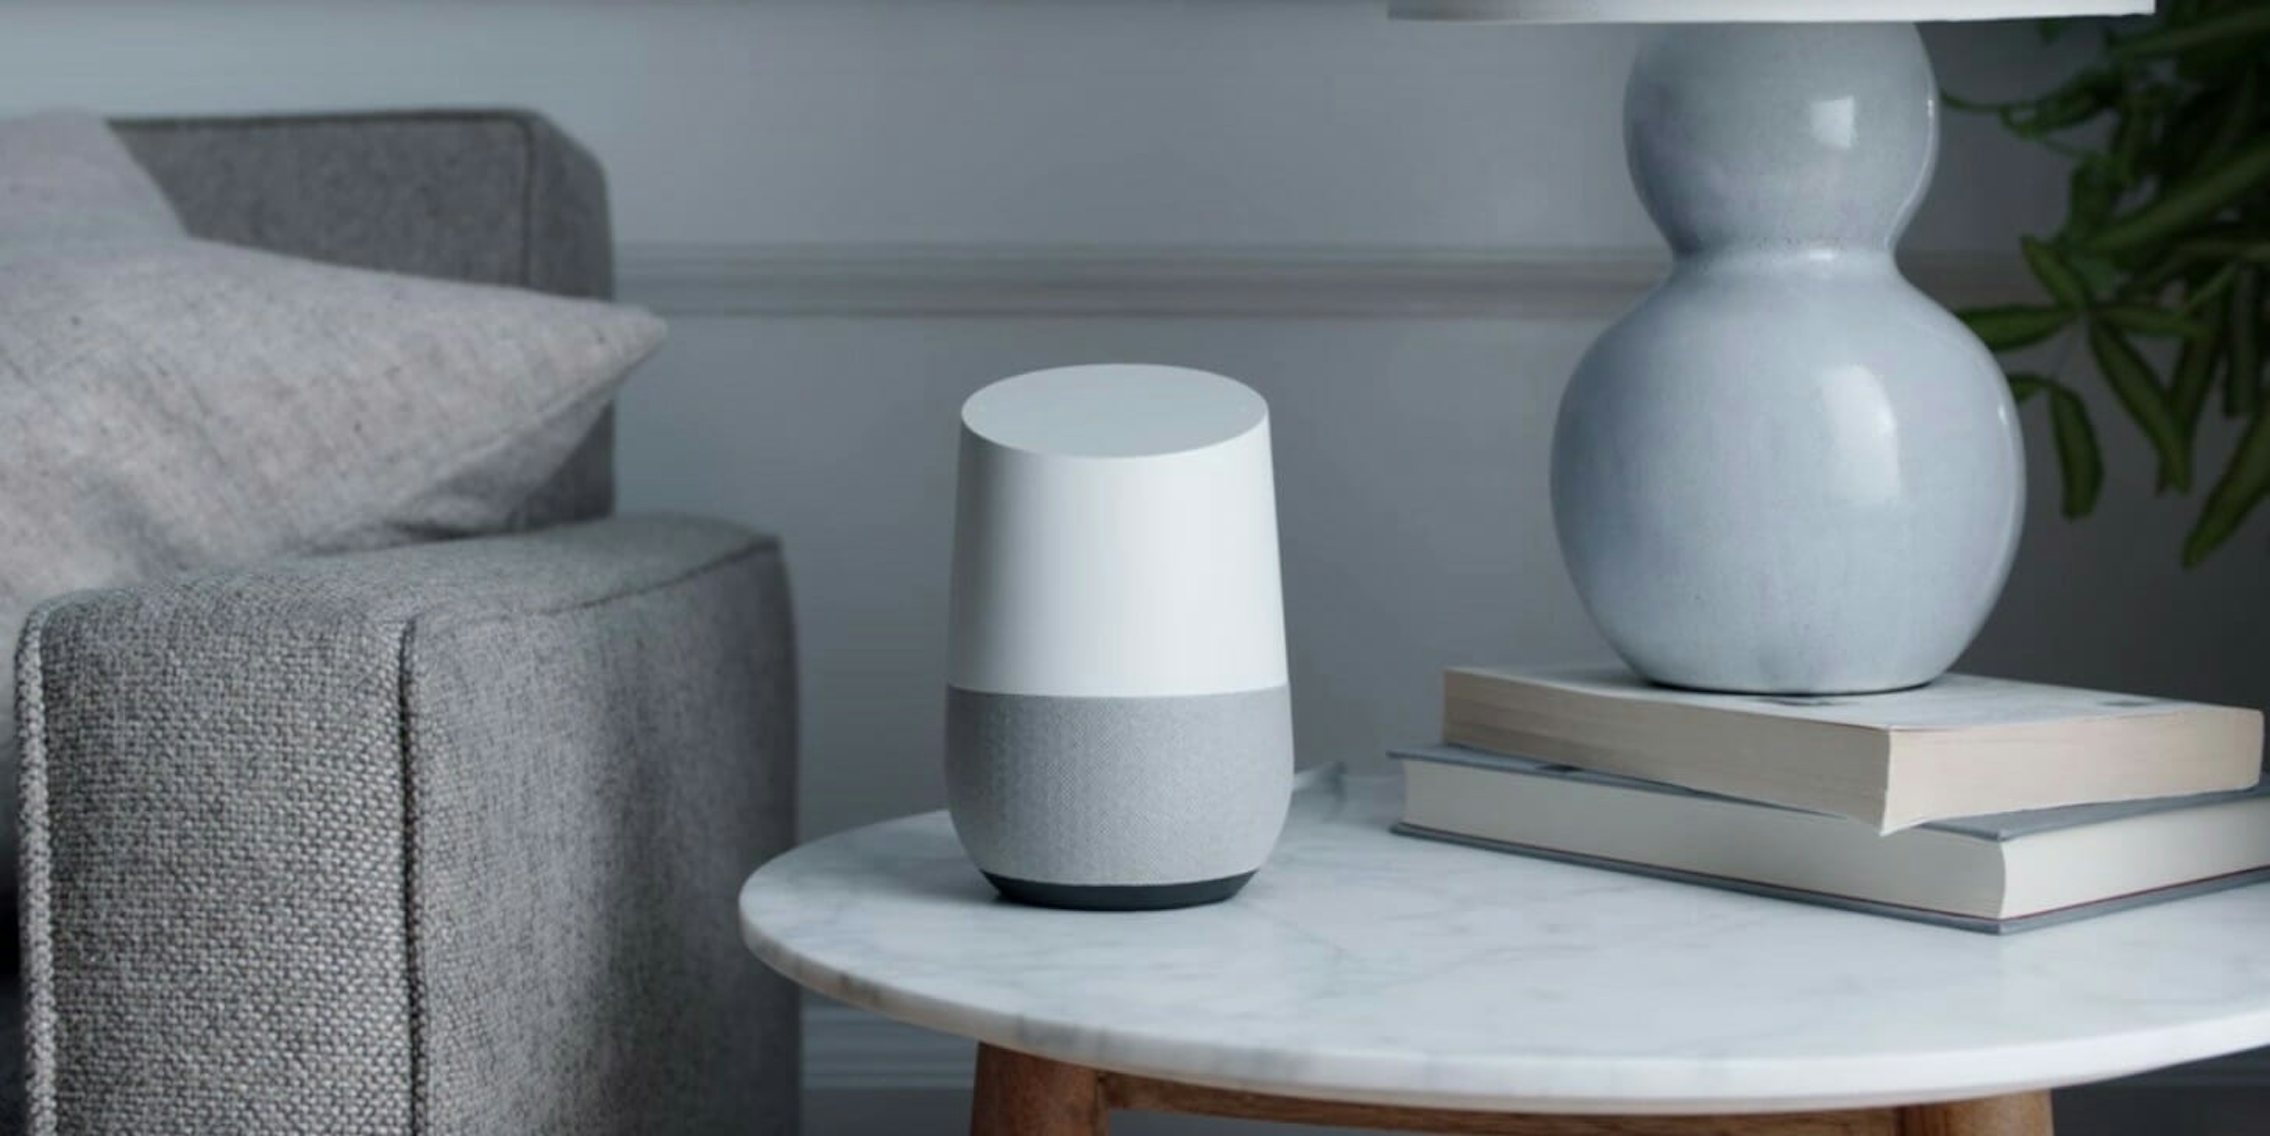 Google Home Multiple Users: How to Add People and Voice Match